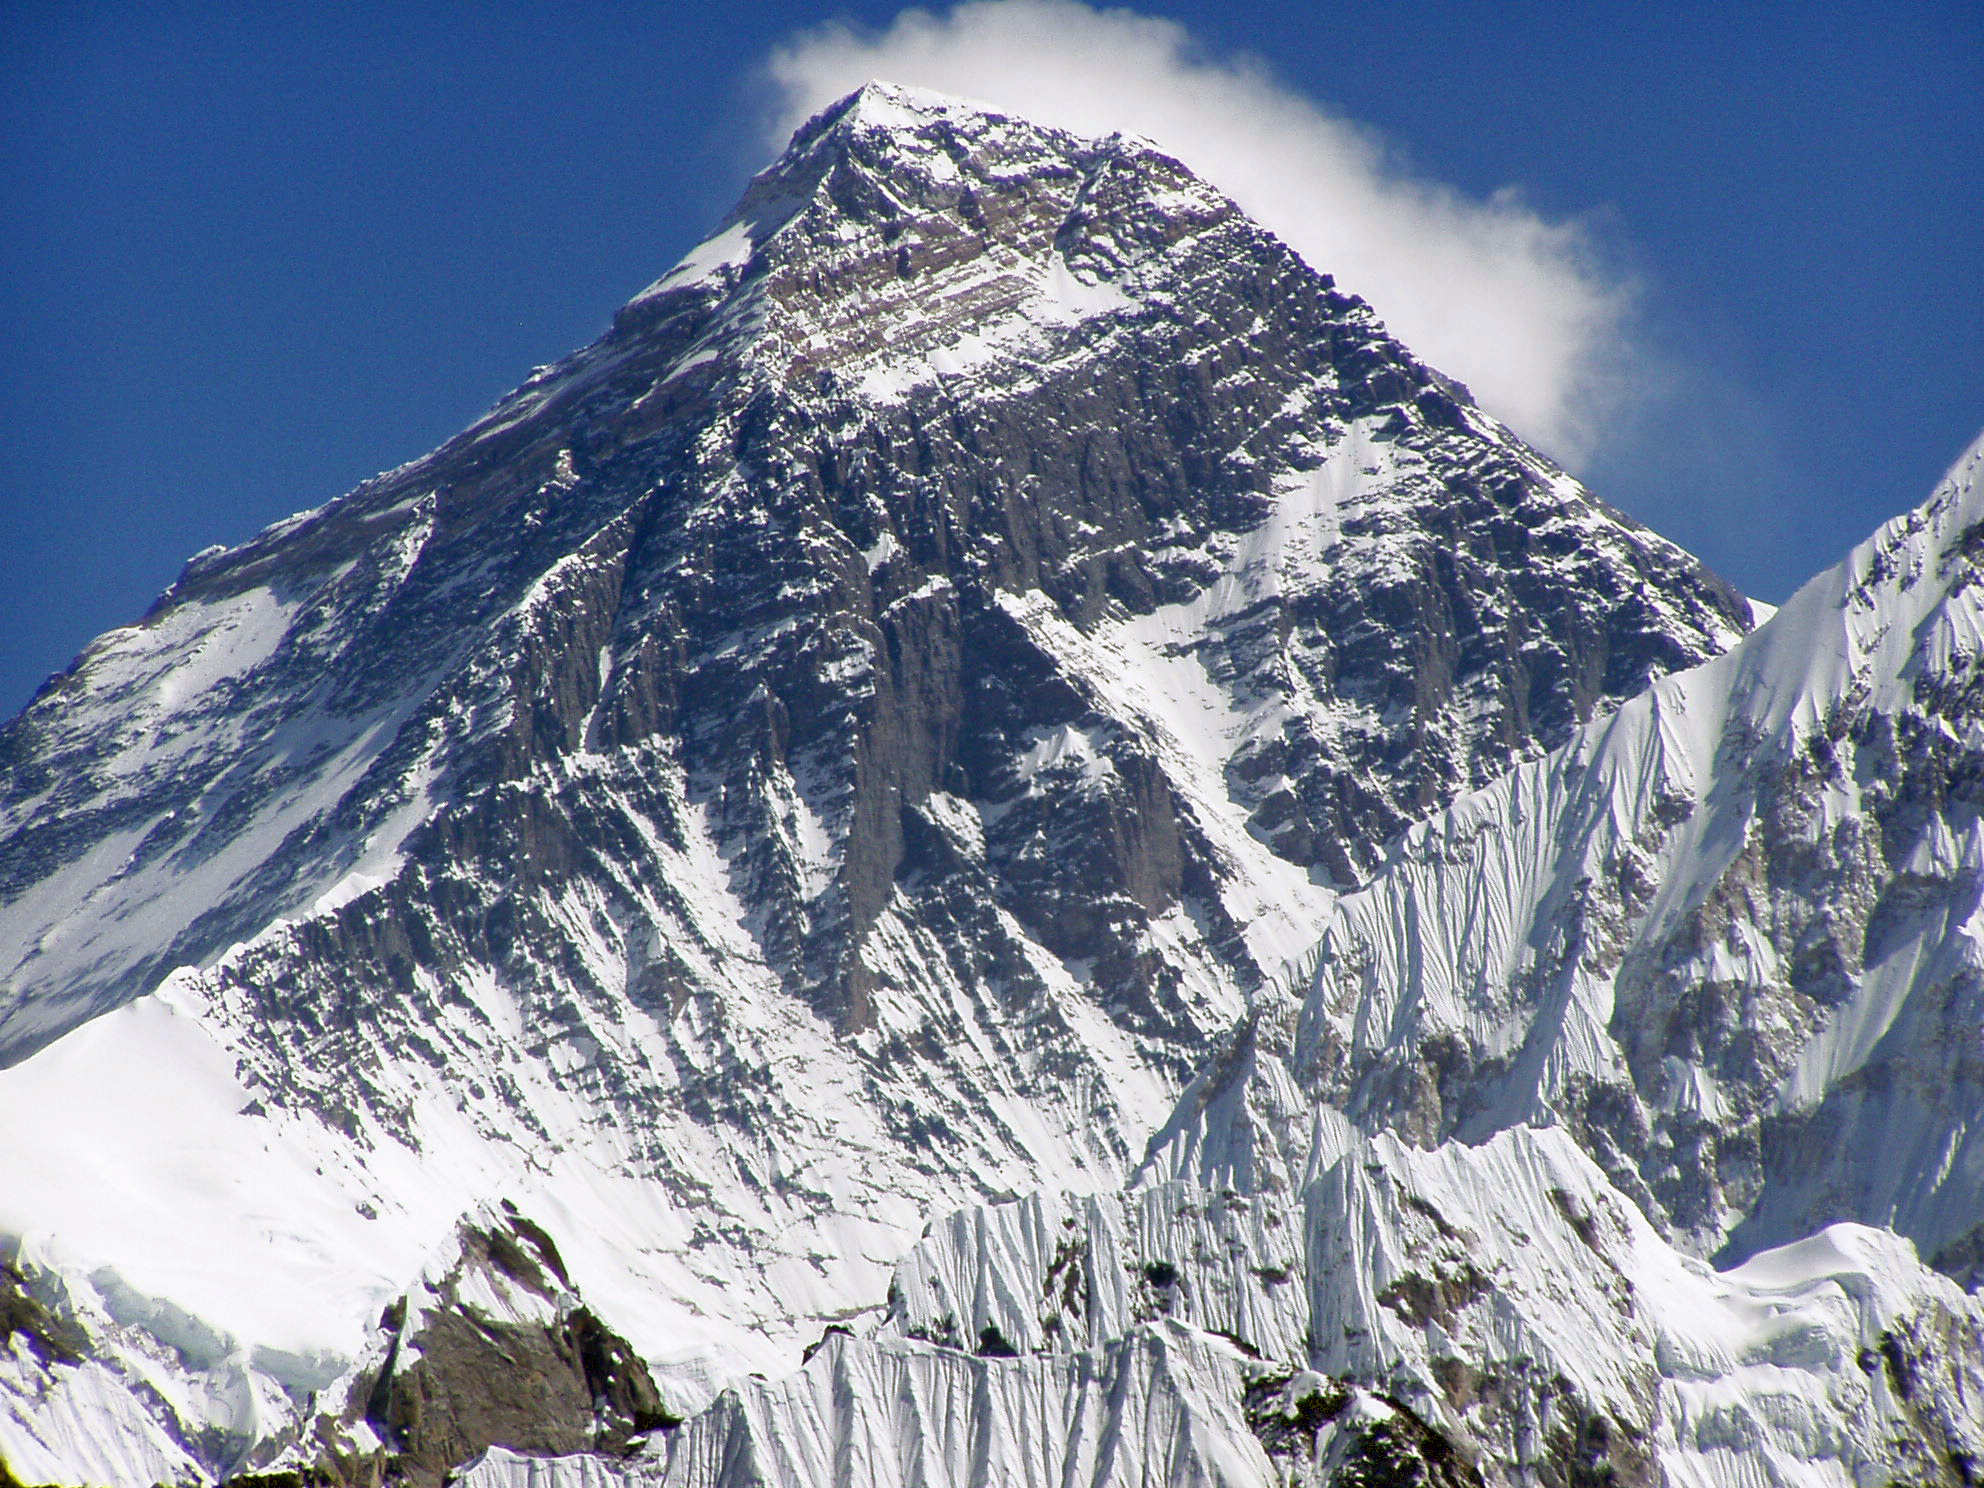 Mount 'Everest', SOUTH-FACE, 29,037 ft; Highest Peak in the Himalayas, 'Hindu Kingdom of NEPAL' 